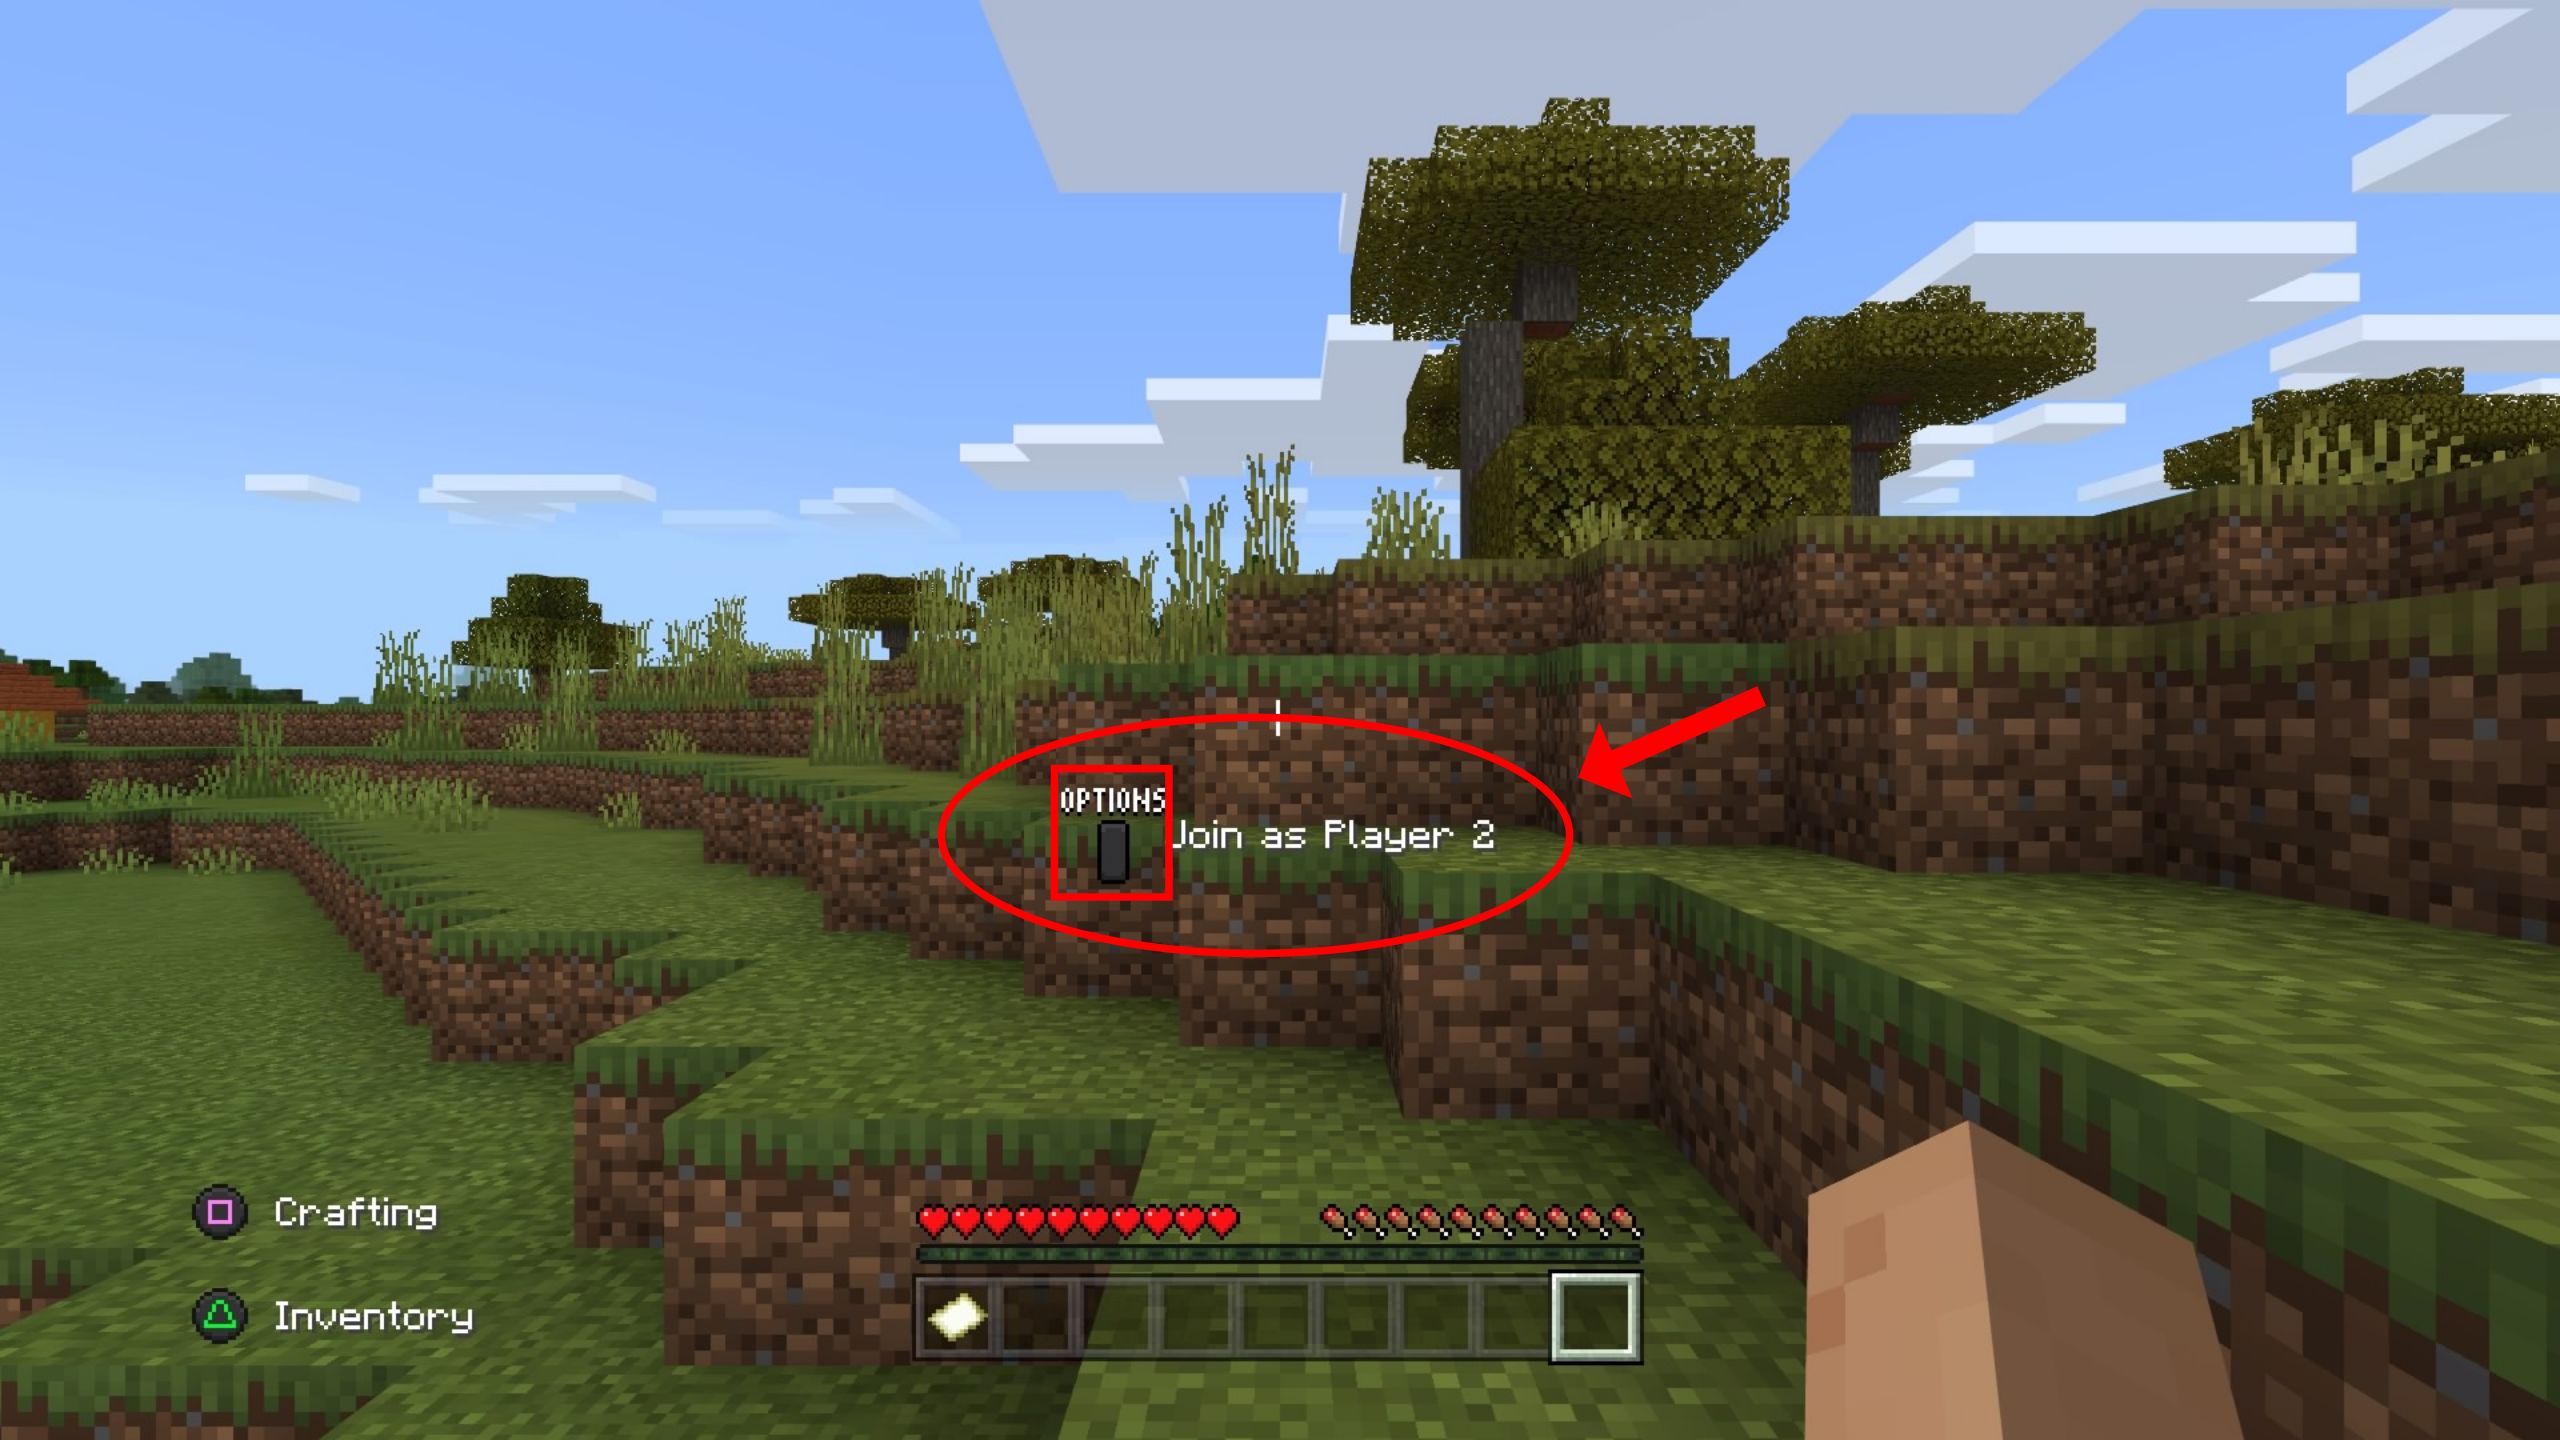 How to Use in Minecraft